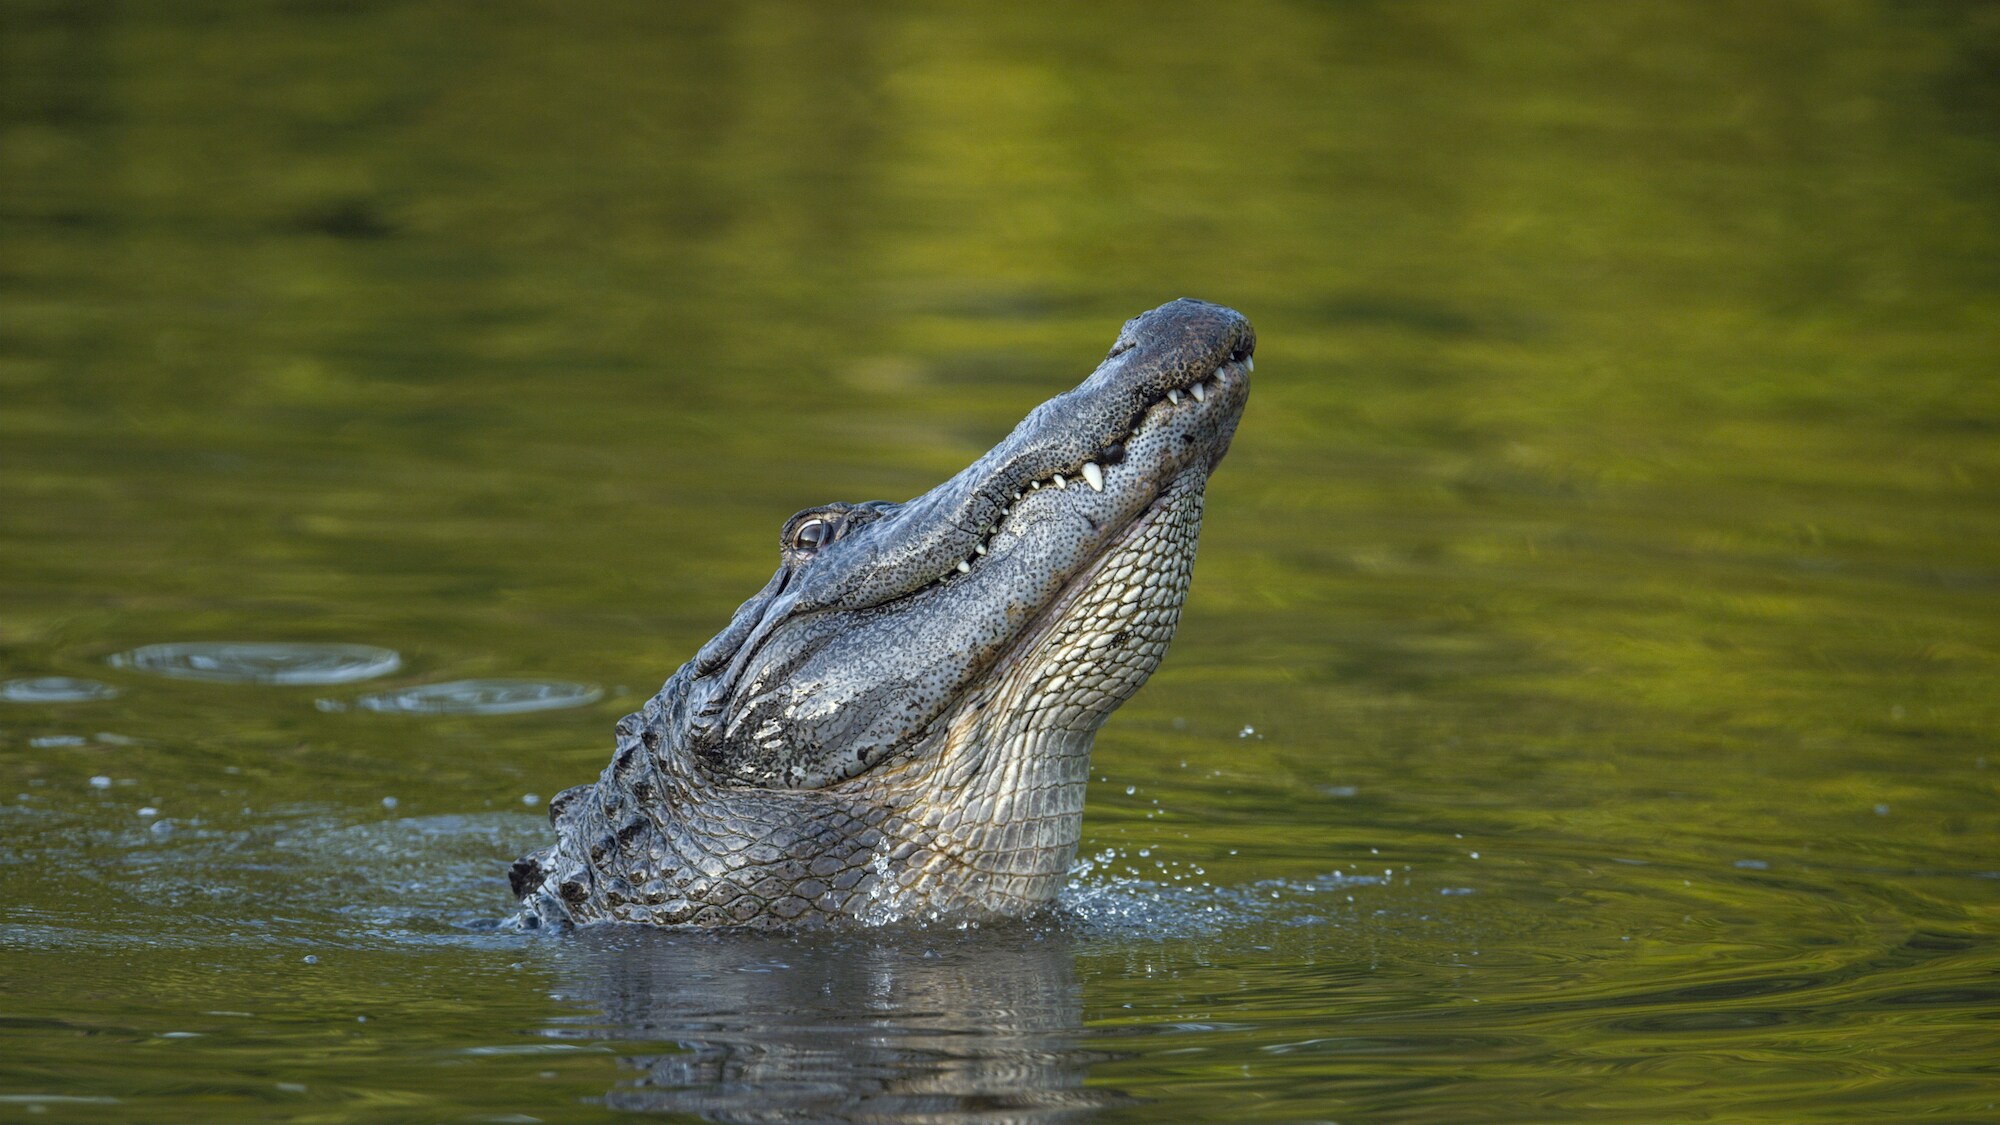 An alligator performs a water dance. (National Geographic for Disney+)